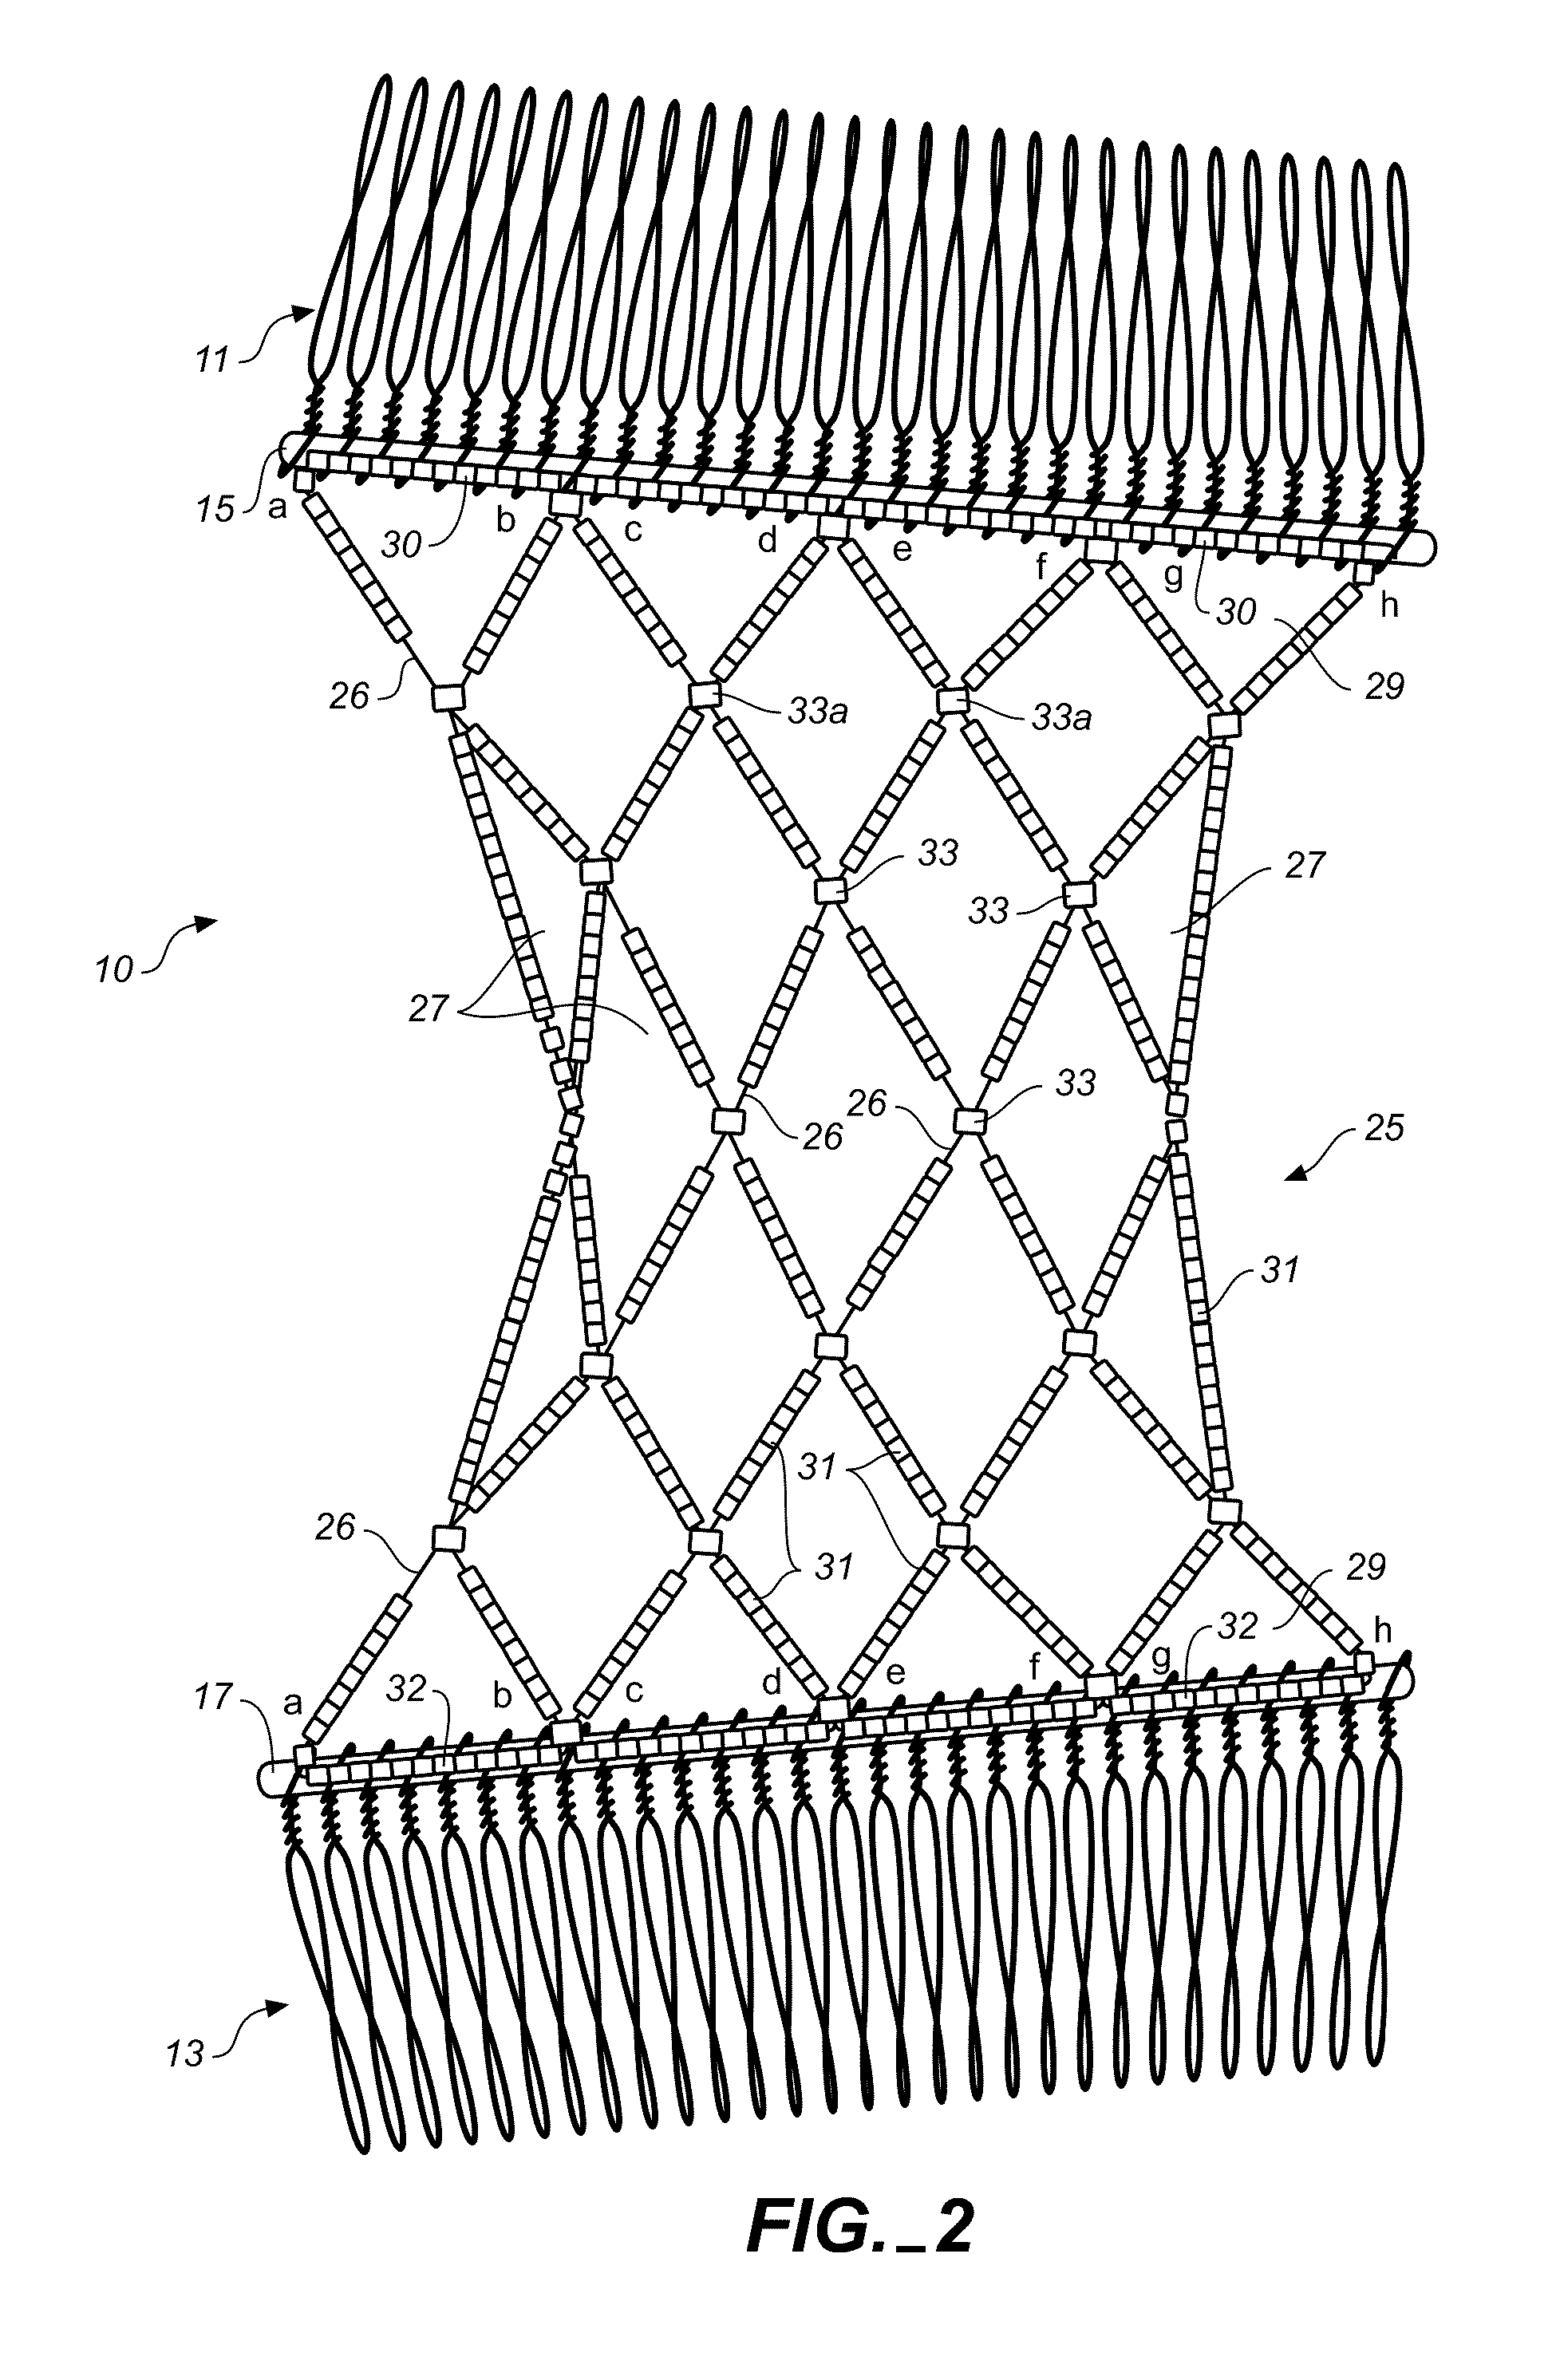 Stretch comb hair retainer